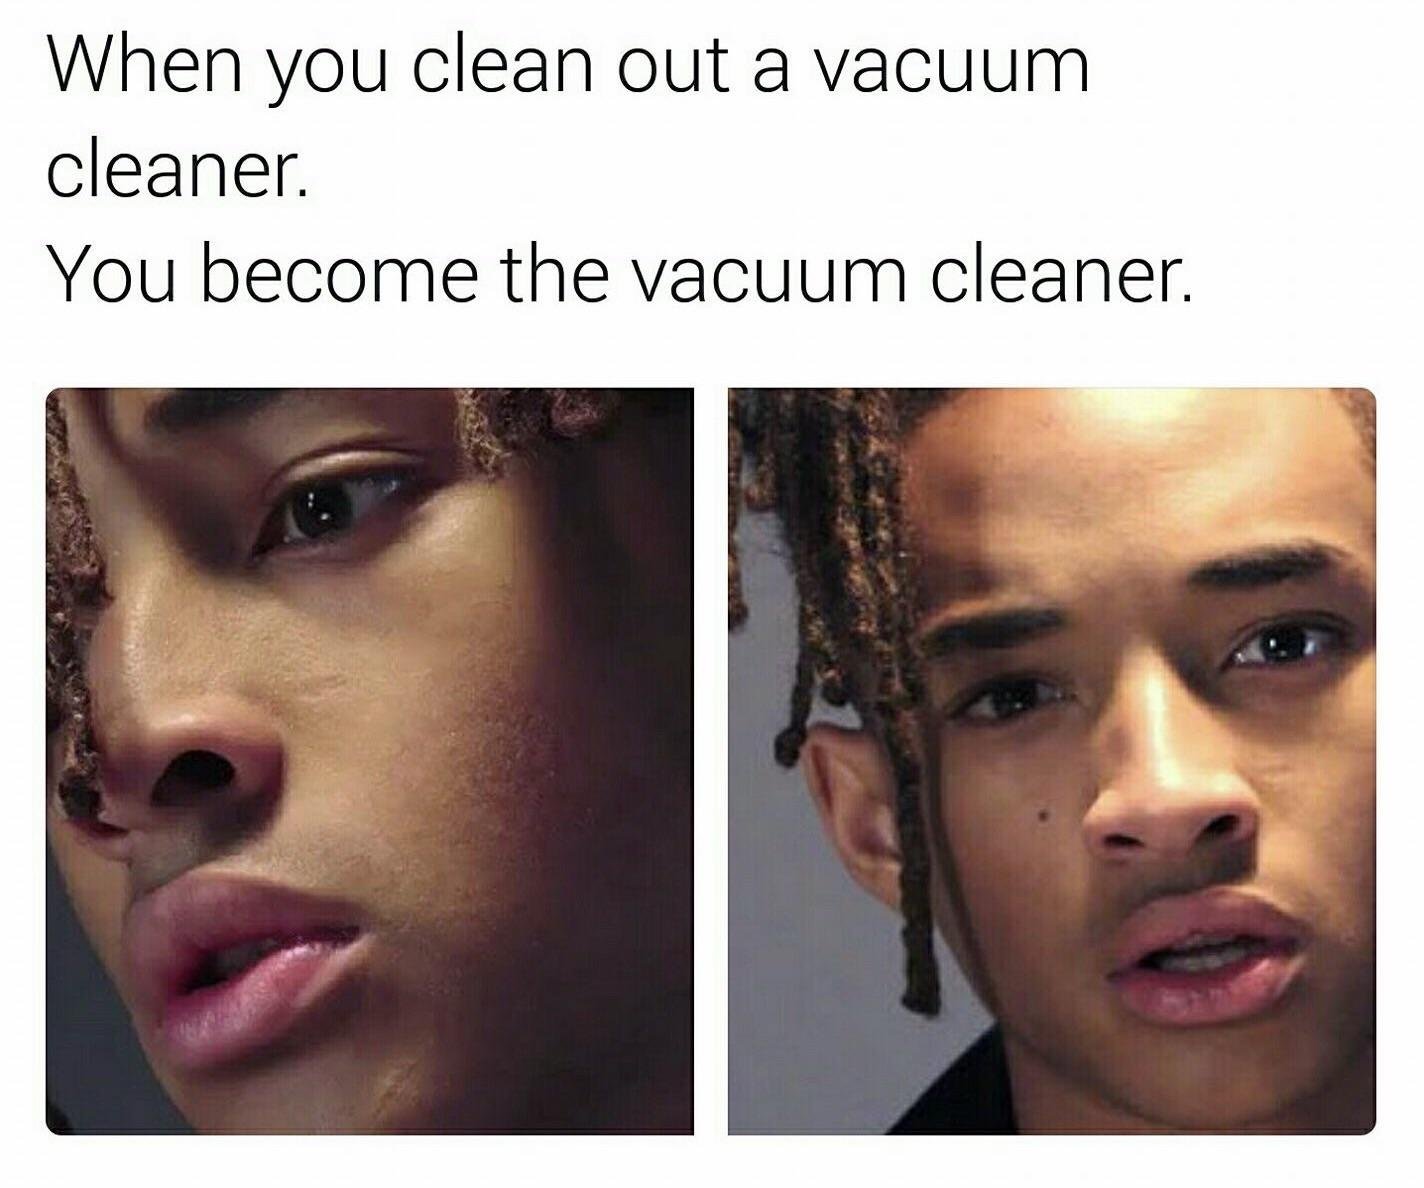 you clean a vacuum cleaner - When you clean out a vacuum cleaner. You become the vacuum cleaner.